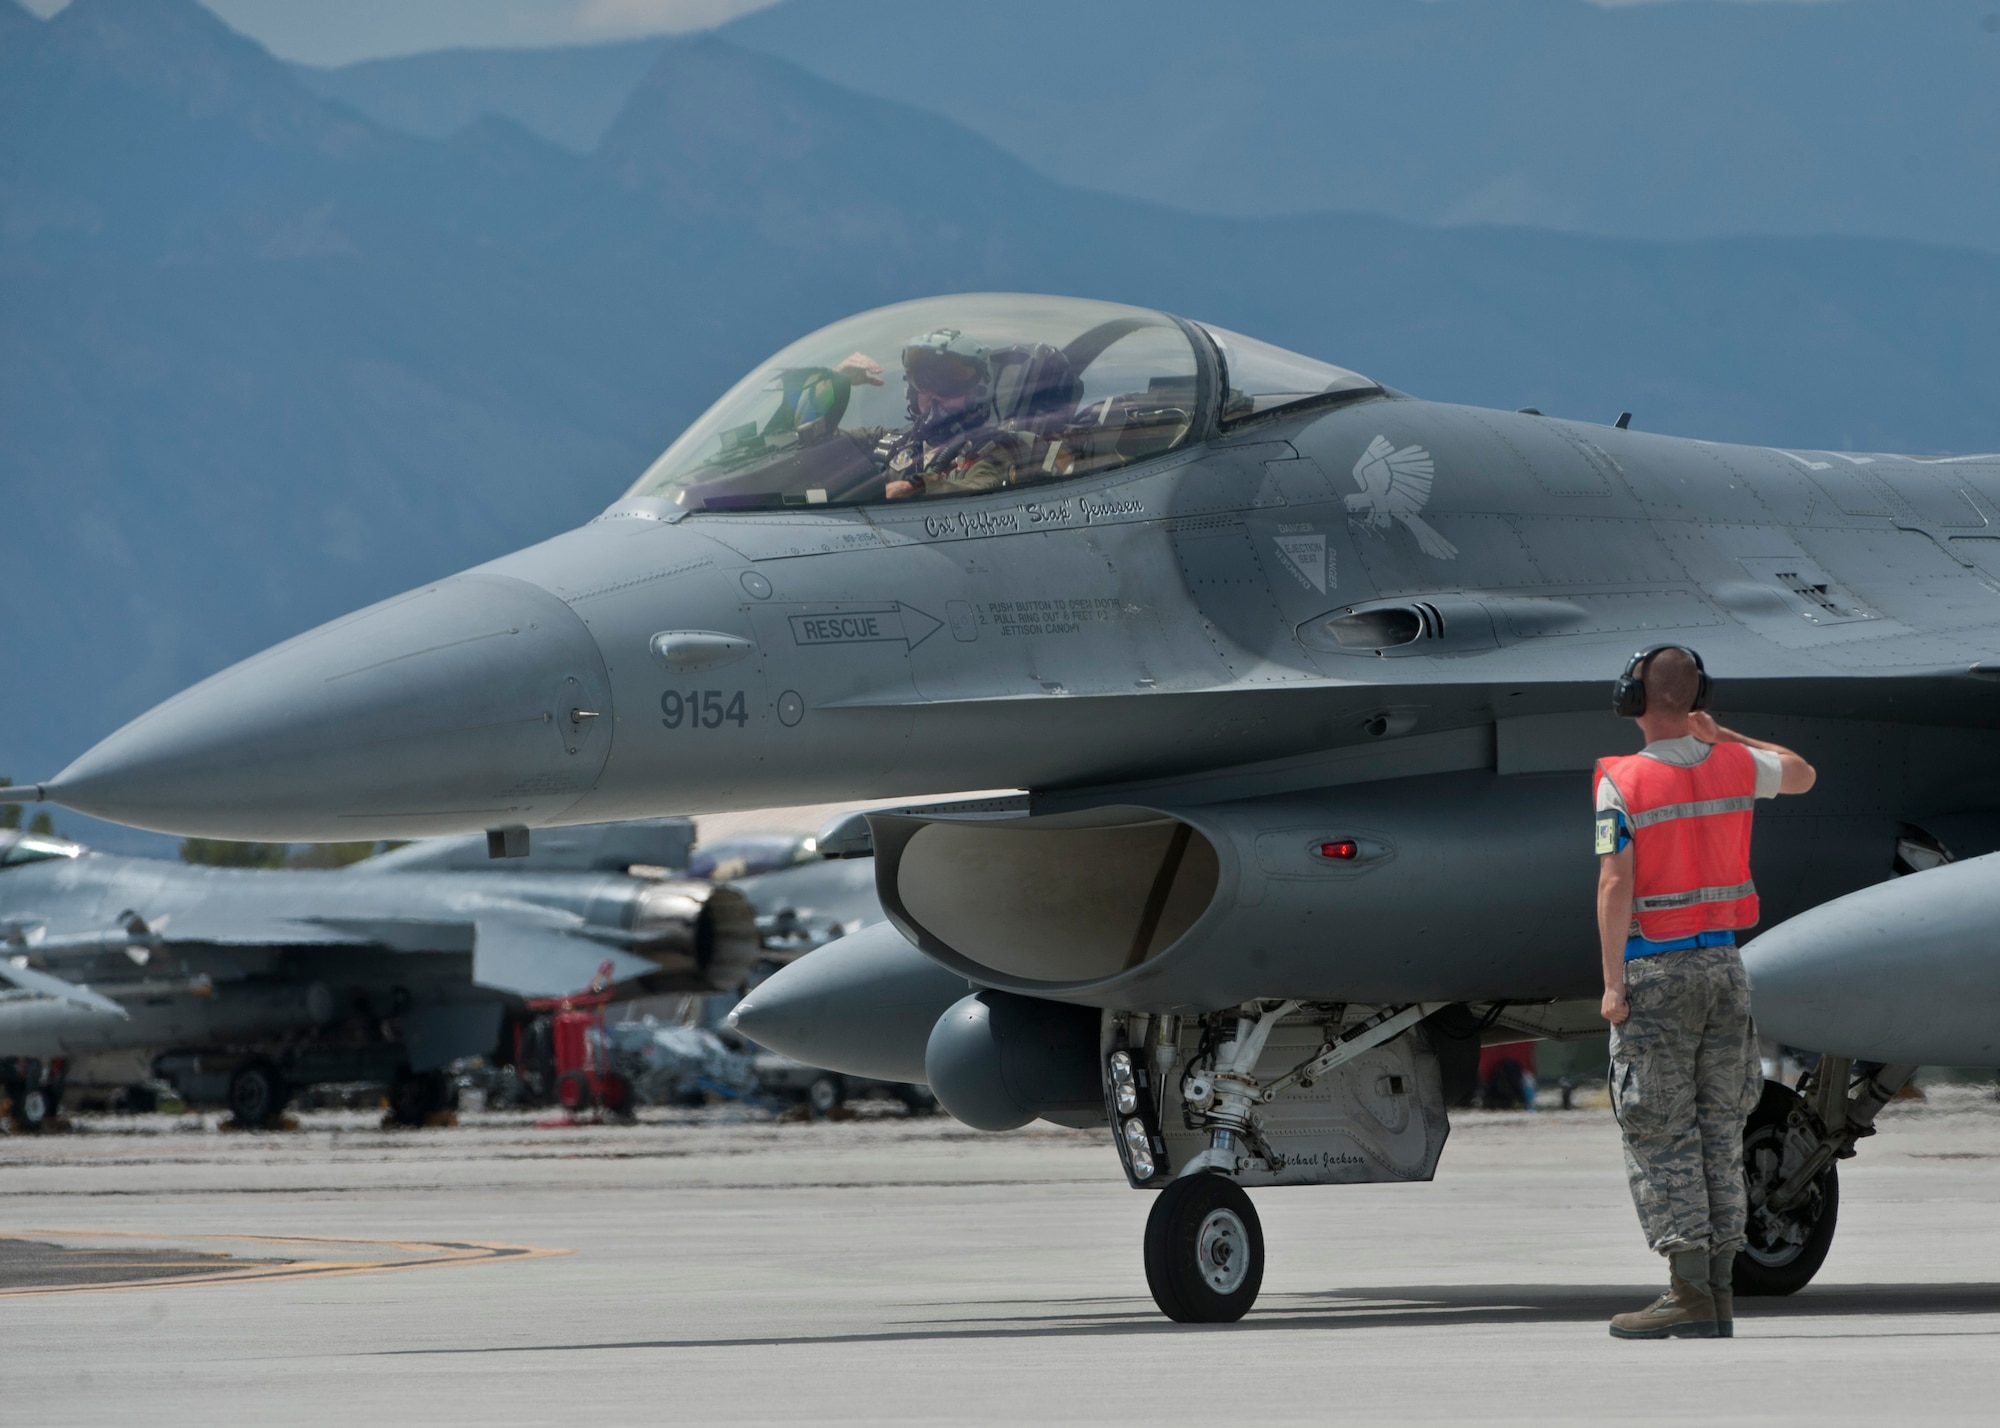 An F-16 Fighting Falcon pilot assigned to the 311th Fighter Squadron, Holloman Air Force Base N.M., salutes a crew chief before taking off as part on an exercise during Red Flag 15-4 at Nellis Air Force Base, Nev., Aug. 27, 2015. Red Flag involves a series of intense air-to-air combat exercises designed to prepare U.S. and allied forces for future real world conflicts. (U.S. Air Force photo by Airman 1st Class Jake Carter)